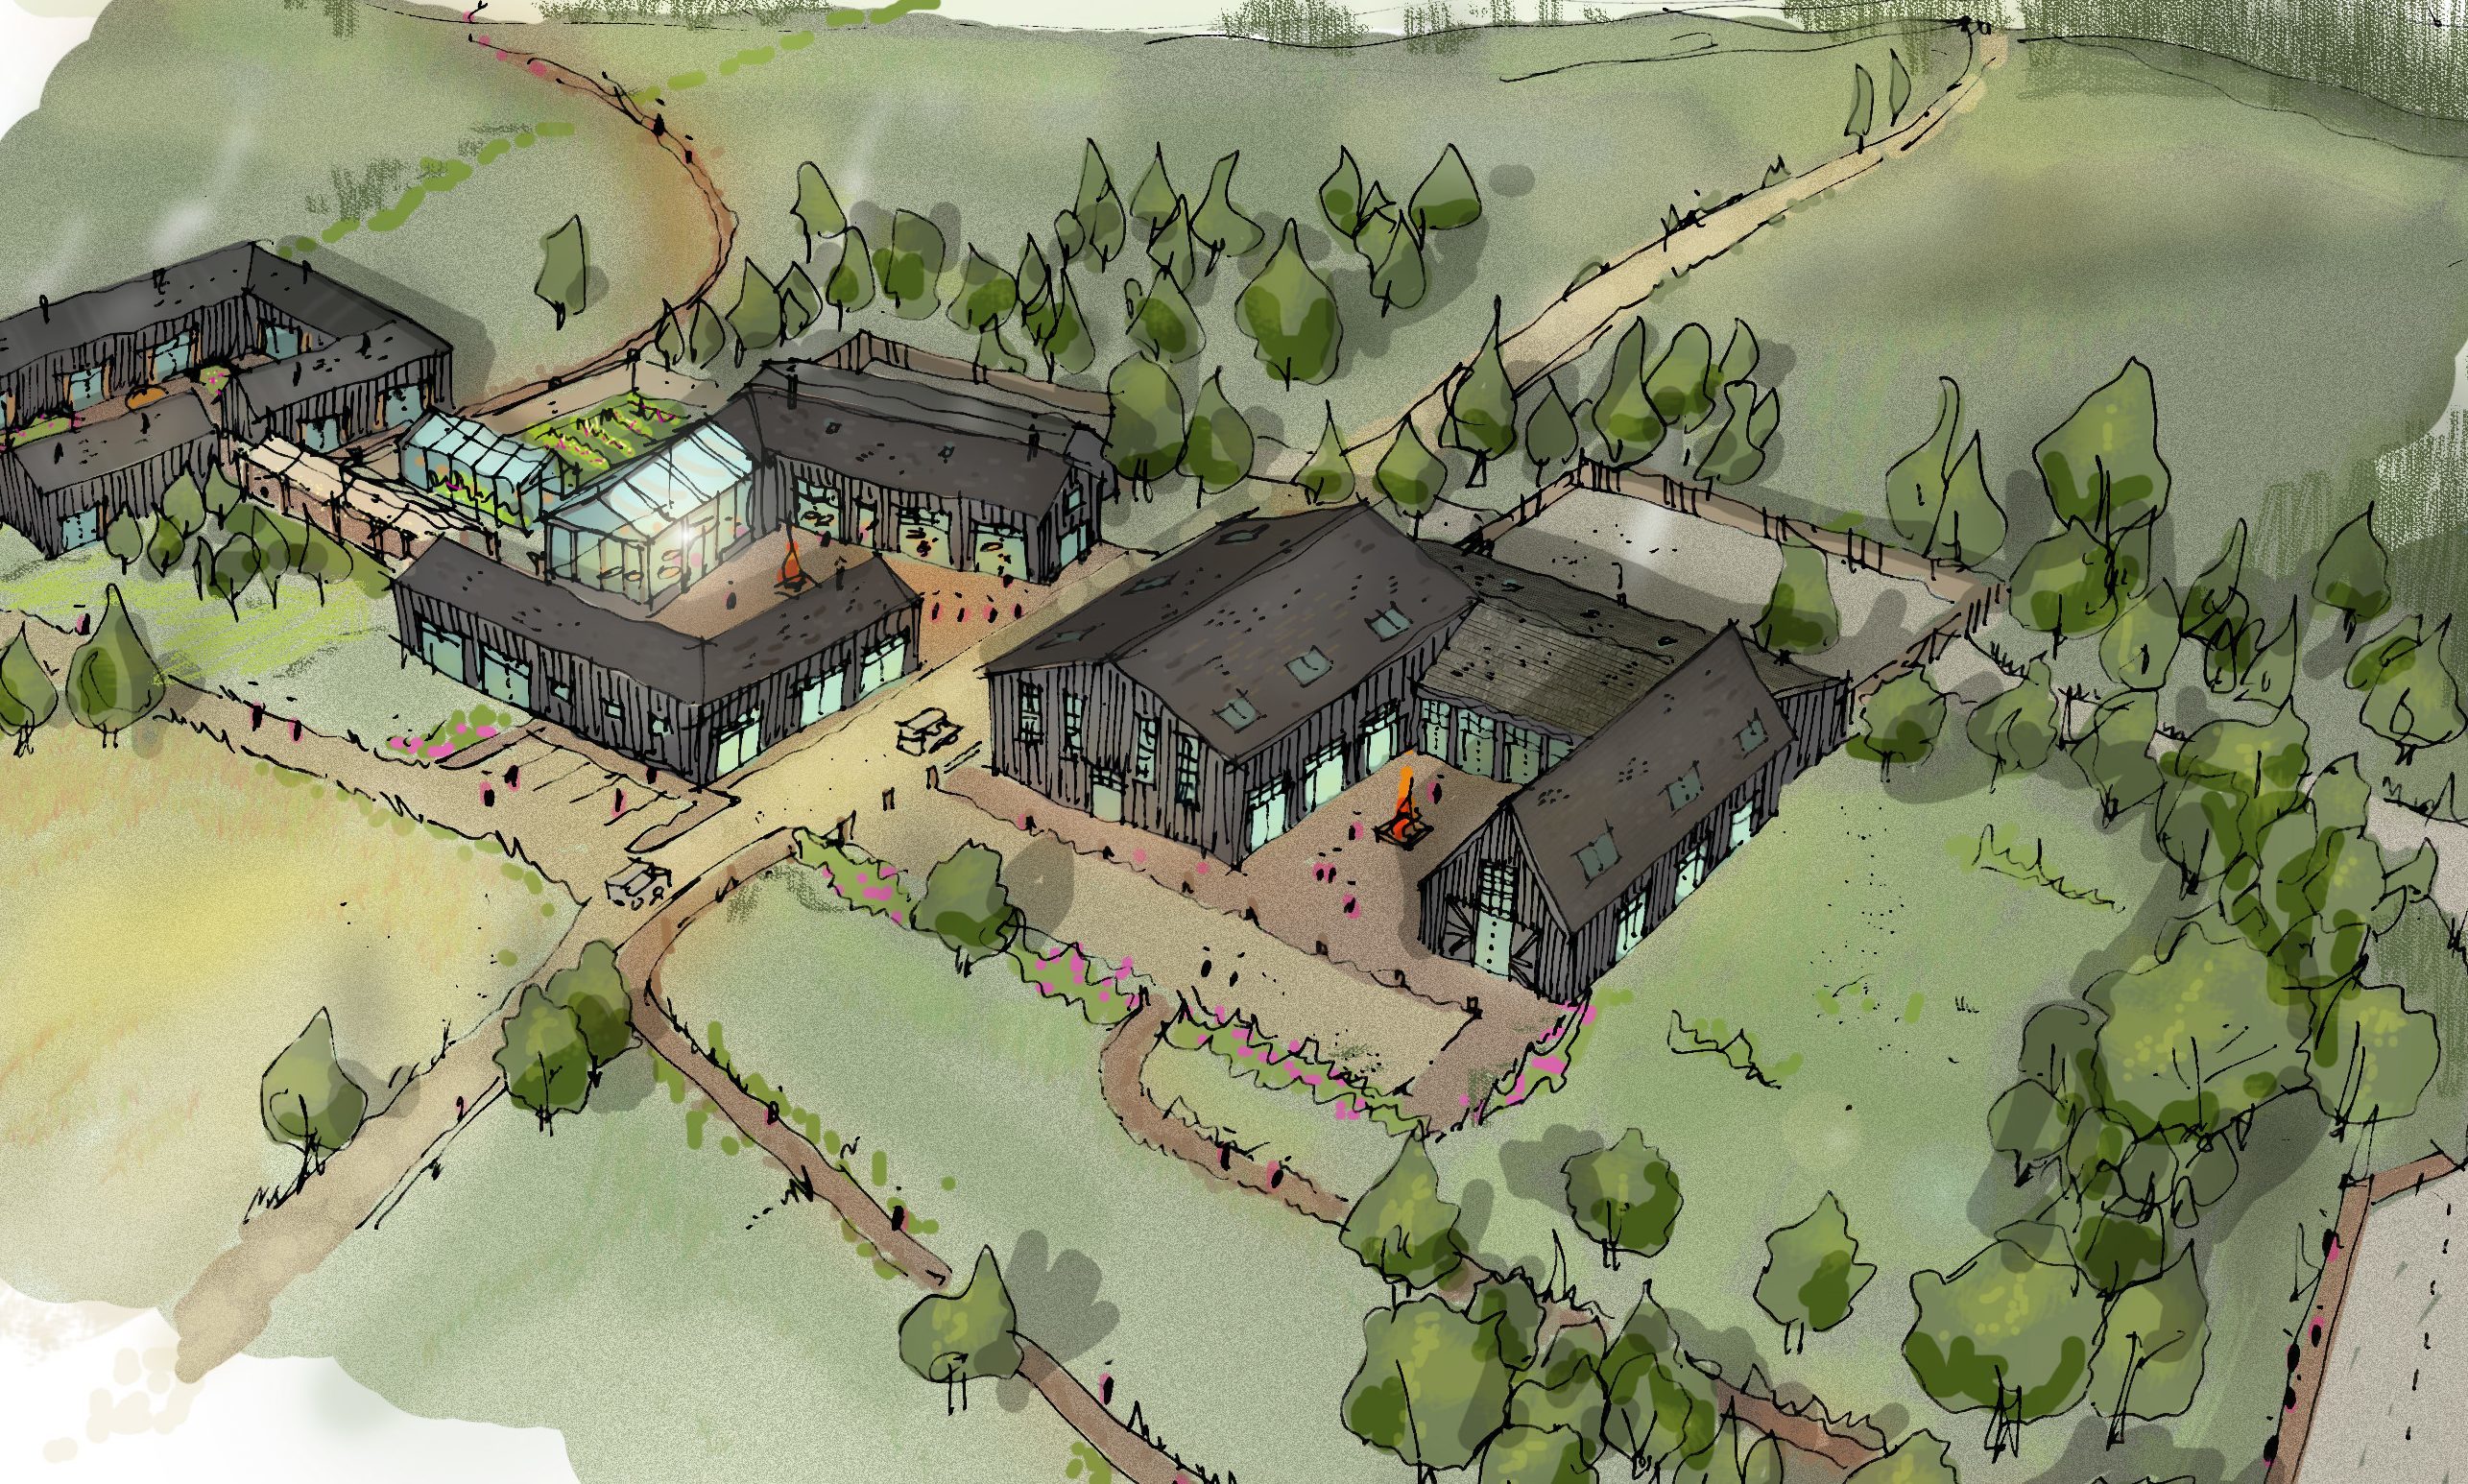 Artwork showing how the new Gleneagles holiday resort could look